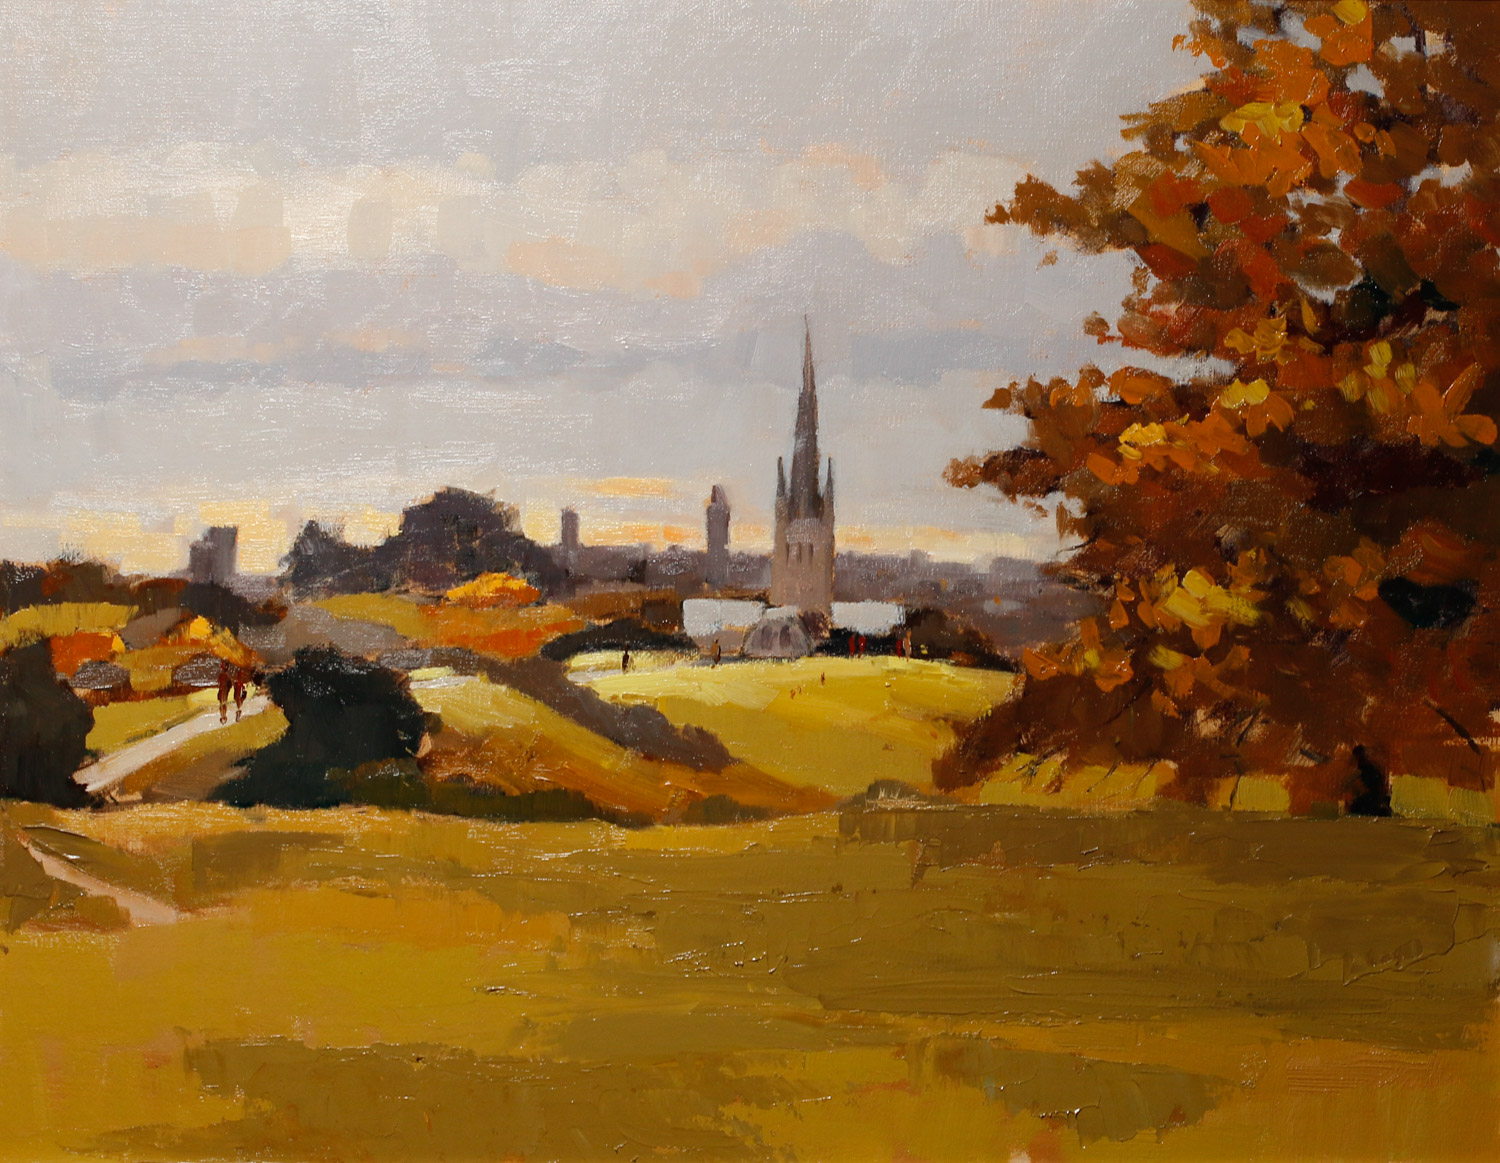 Artist Mo Teeuw - View of Norwich from Mousehold Heath 14x18 Oil on Canvas at Paint Out Norwich 2015